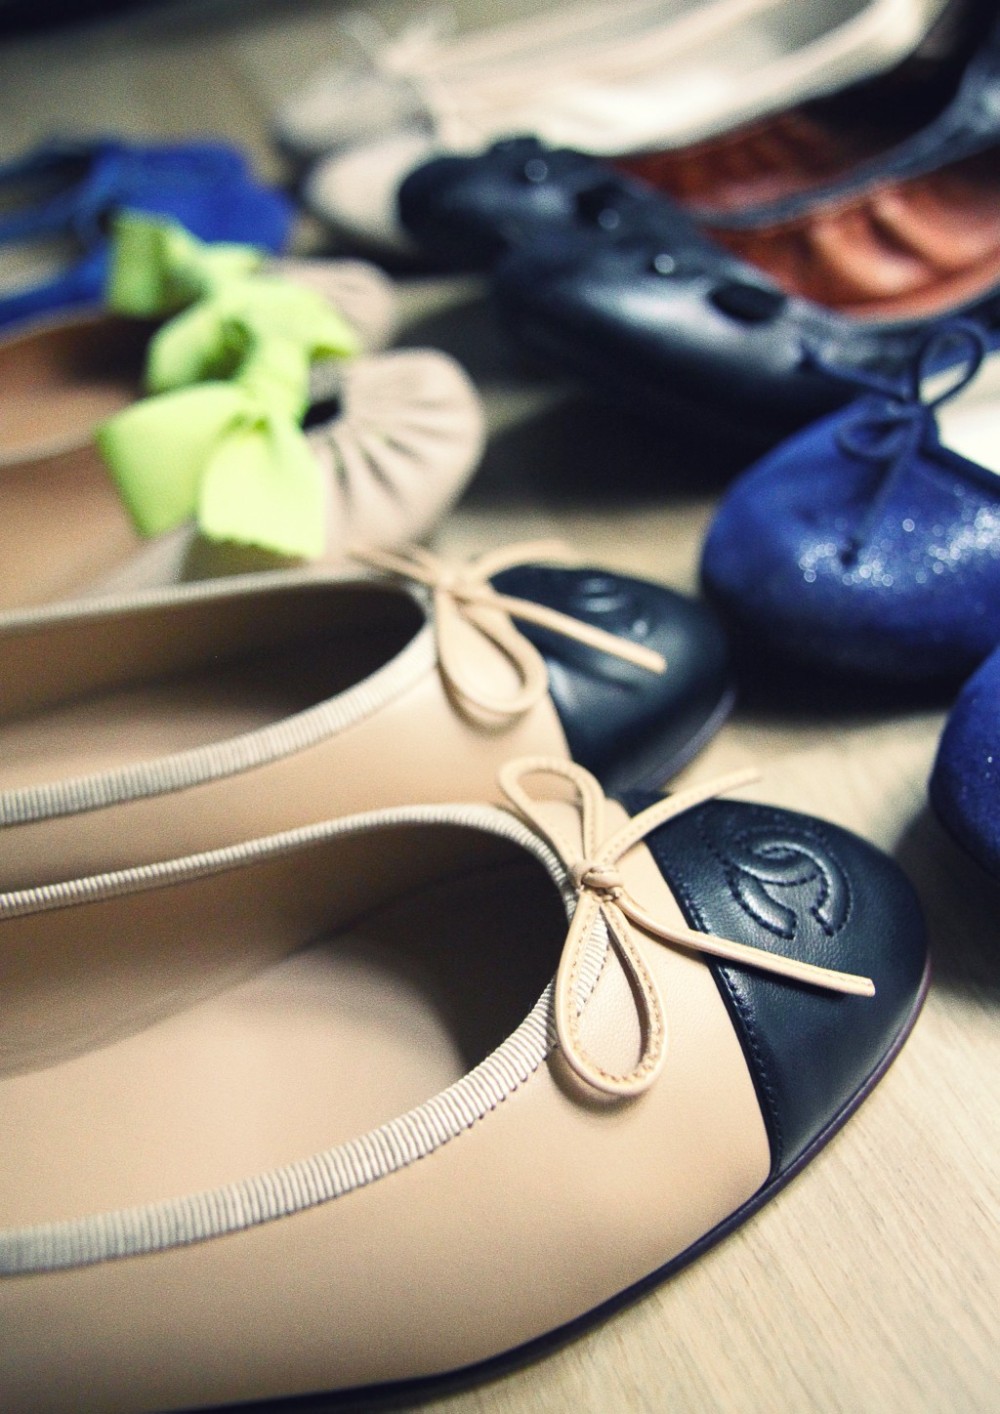 Ballerines Chanel, Repetto, Marc by Marc Jacobs, Maloles...